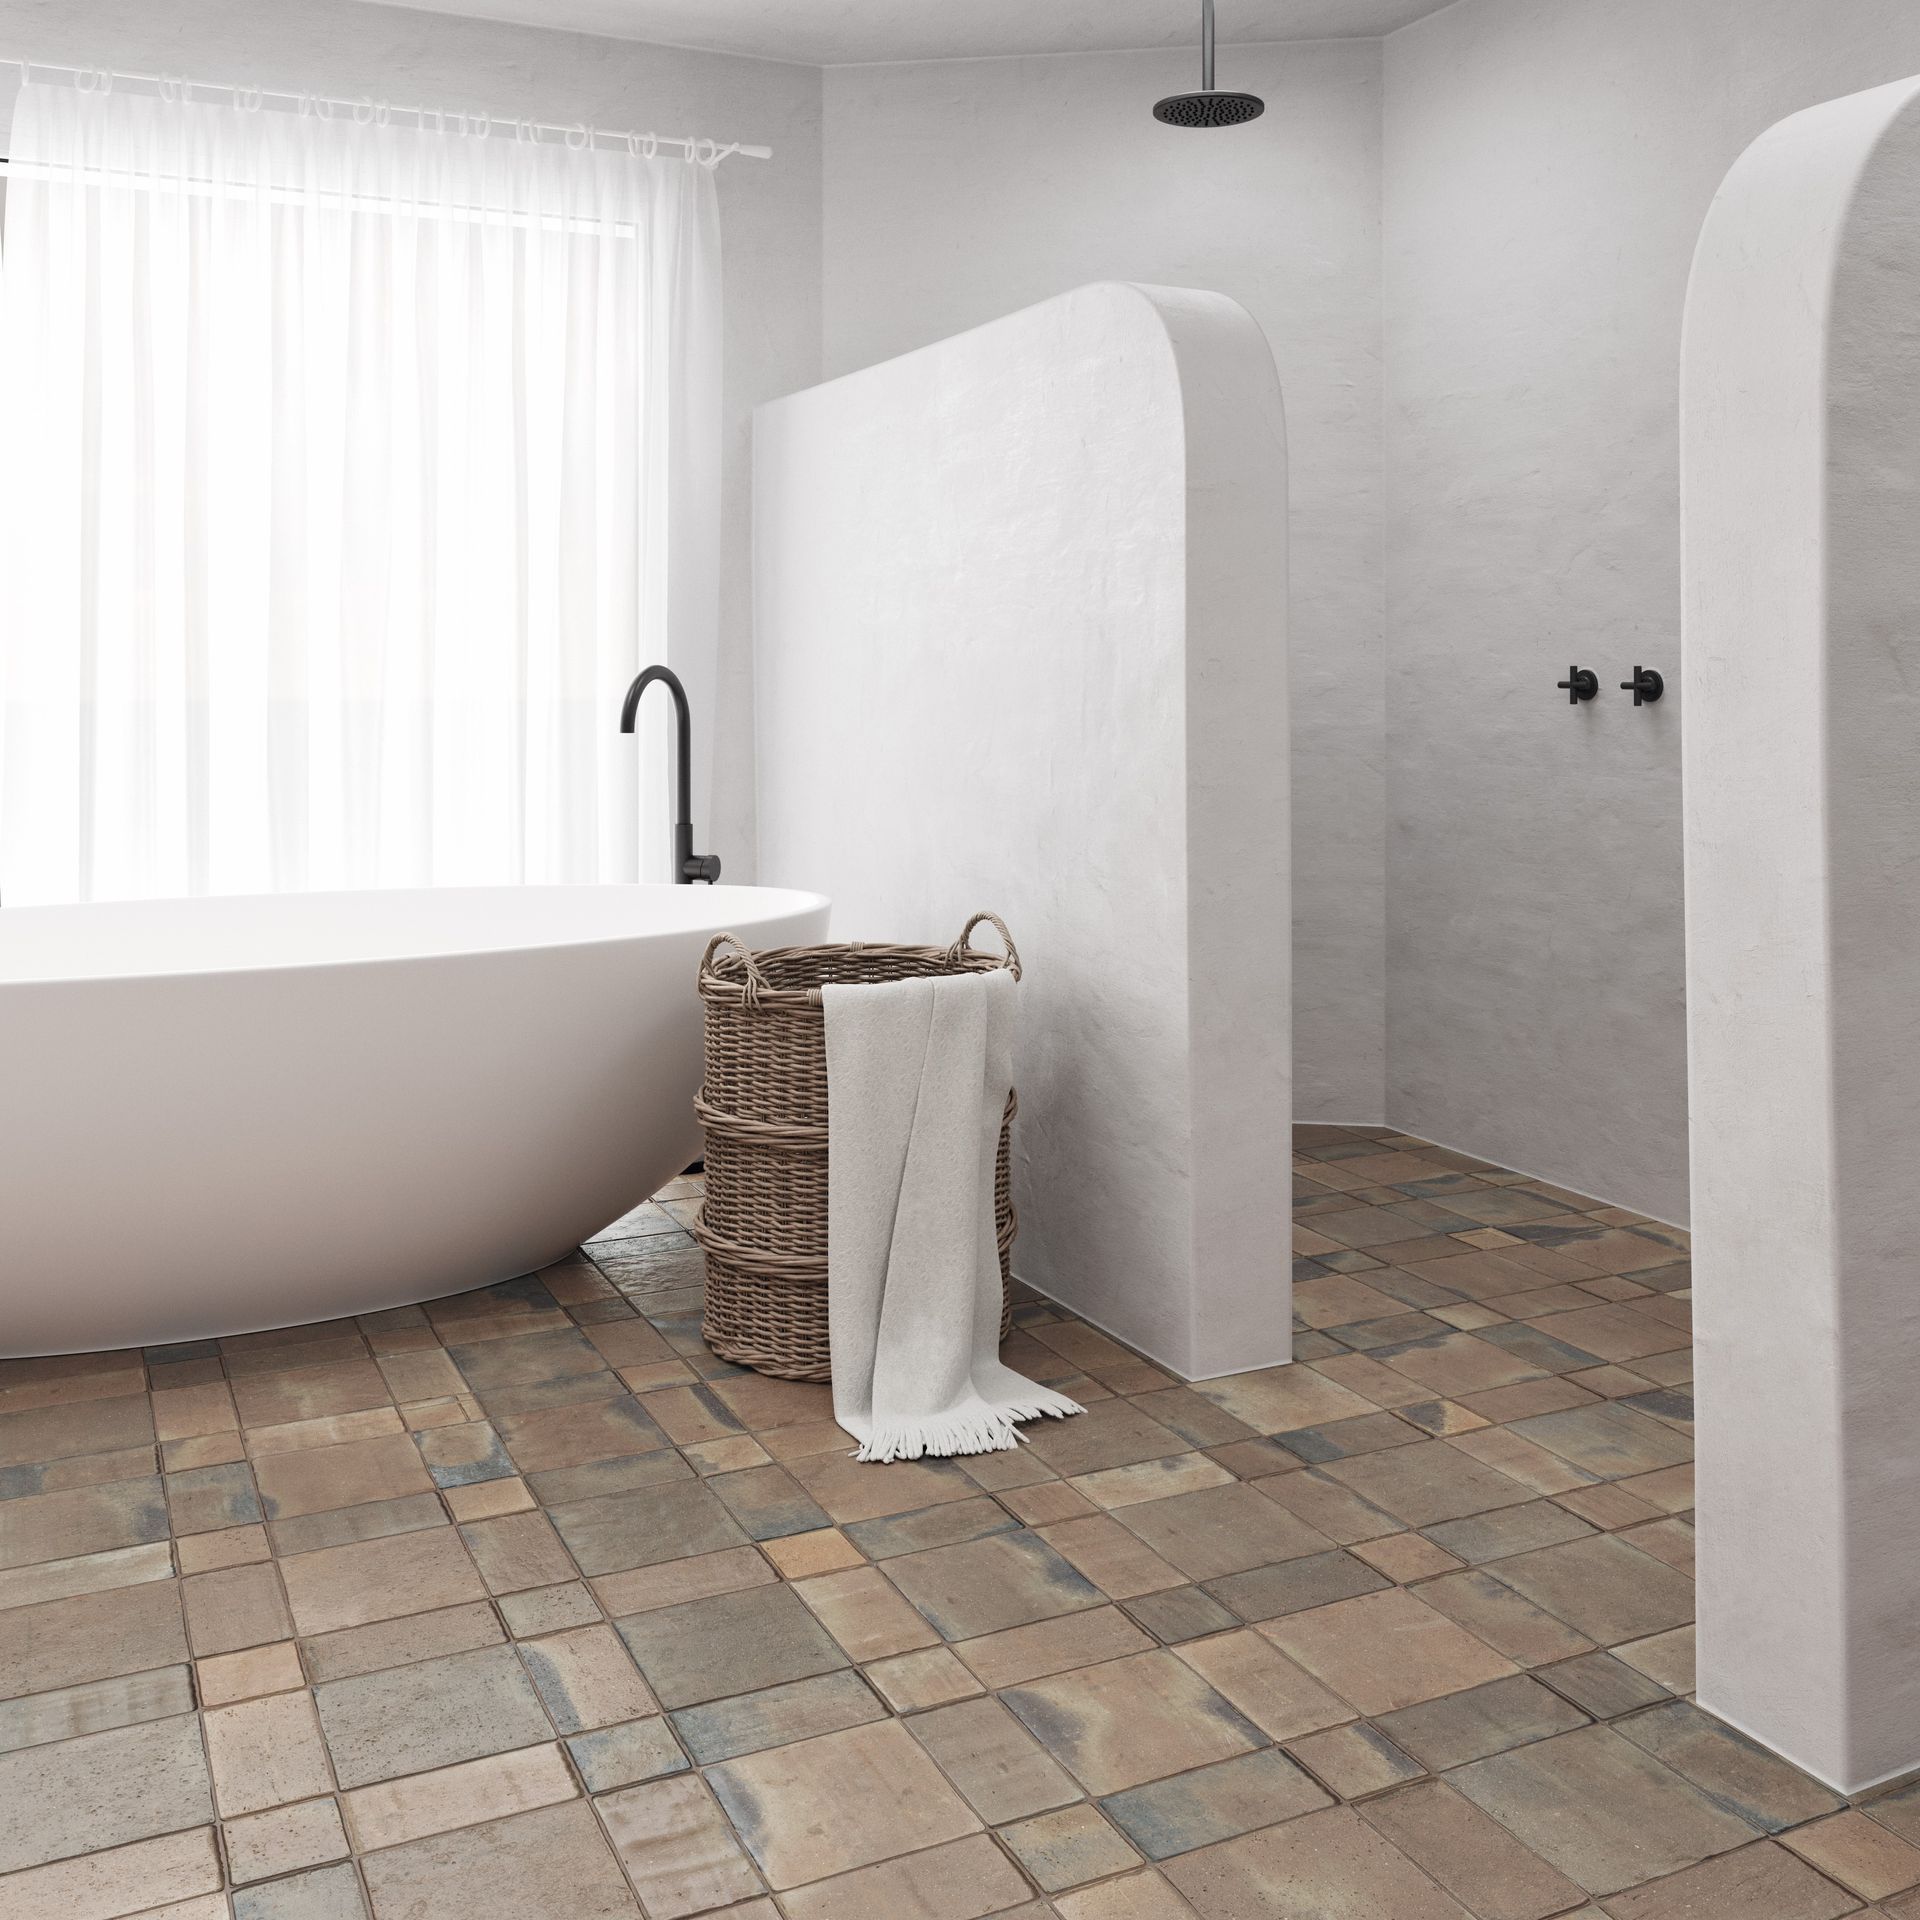 Rustic terracotta tiles used in a bathroom with a white oval bathtub and a black tap